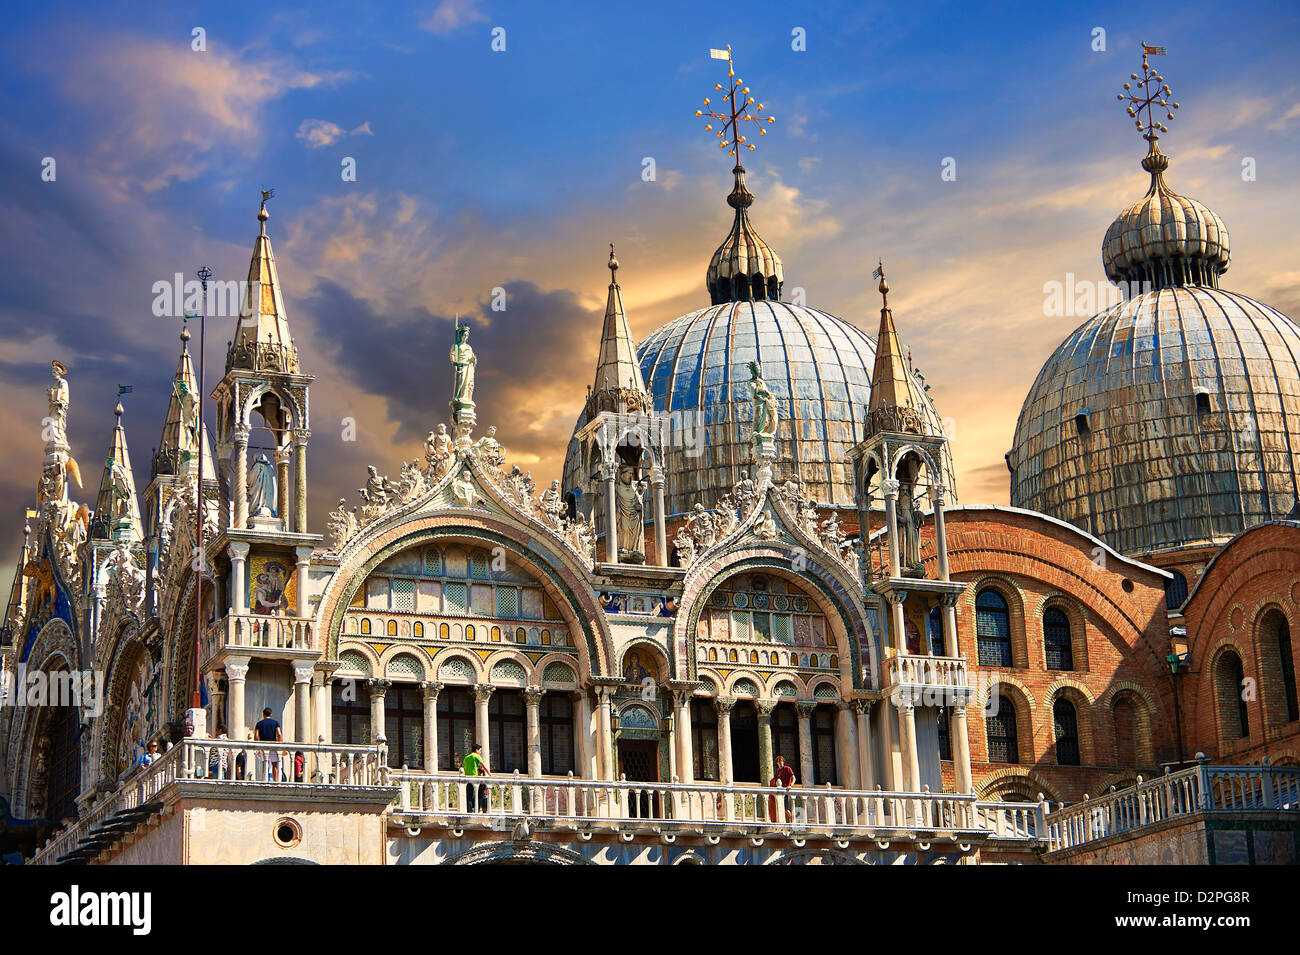 Facade with Gothic architecture and Romanesque domes of St Mark's Basilica at sunset , Venice Stock Photo